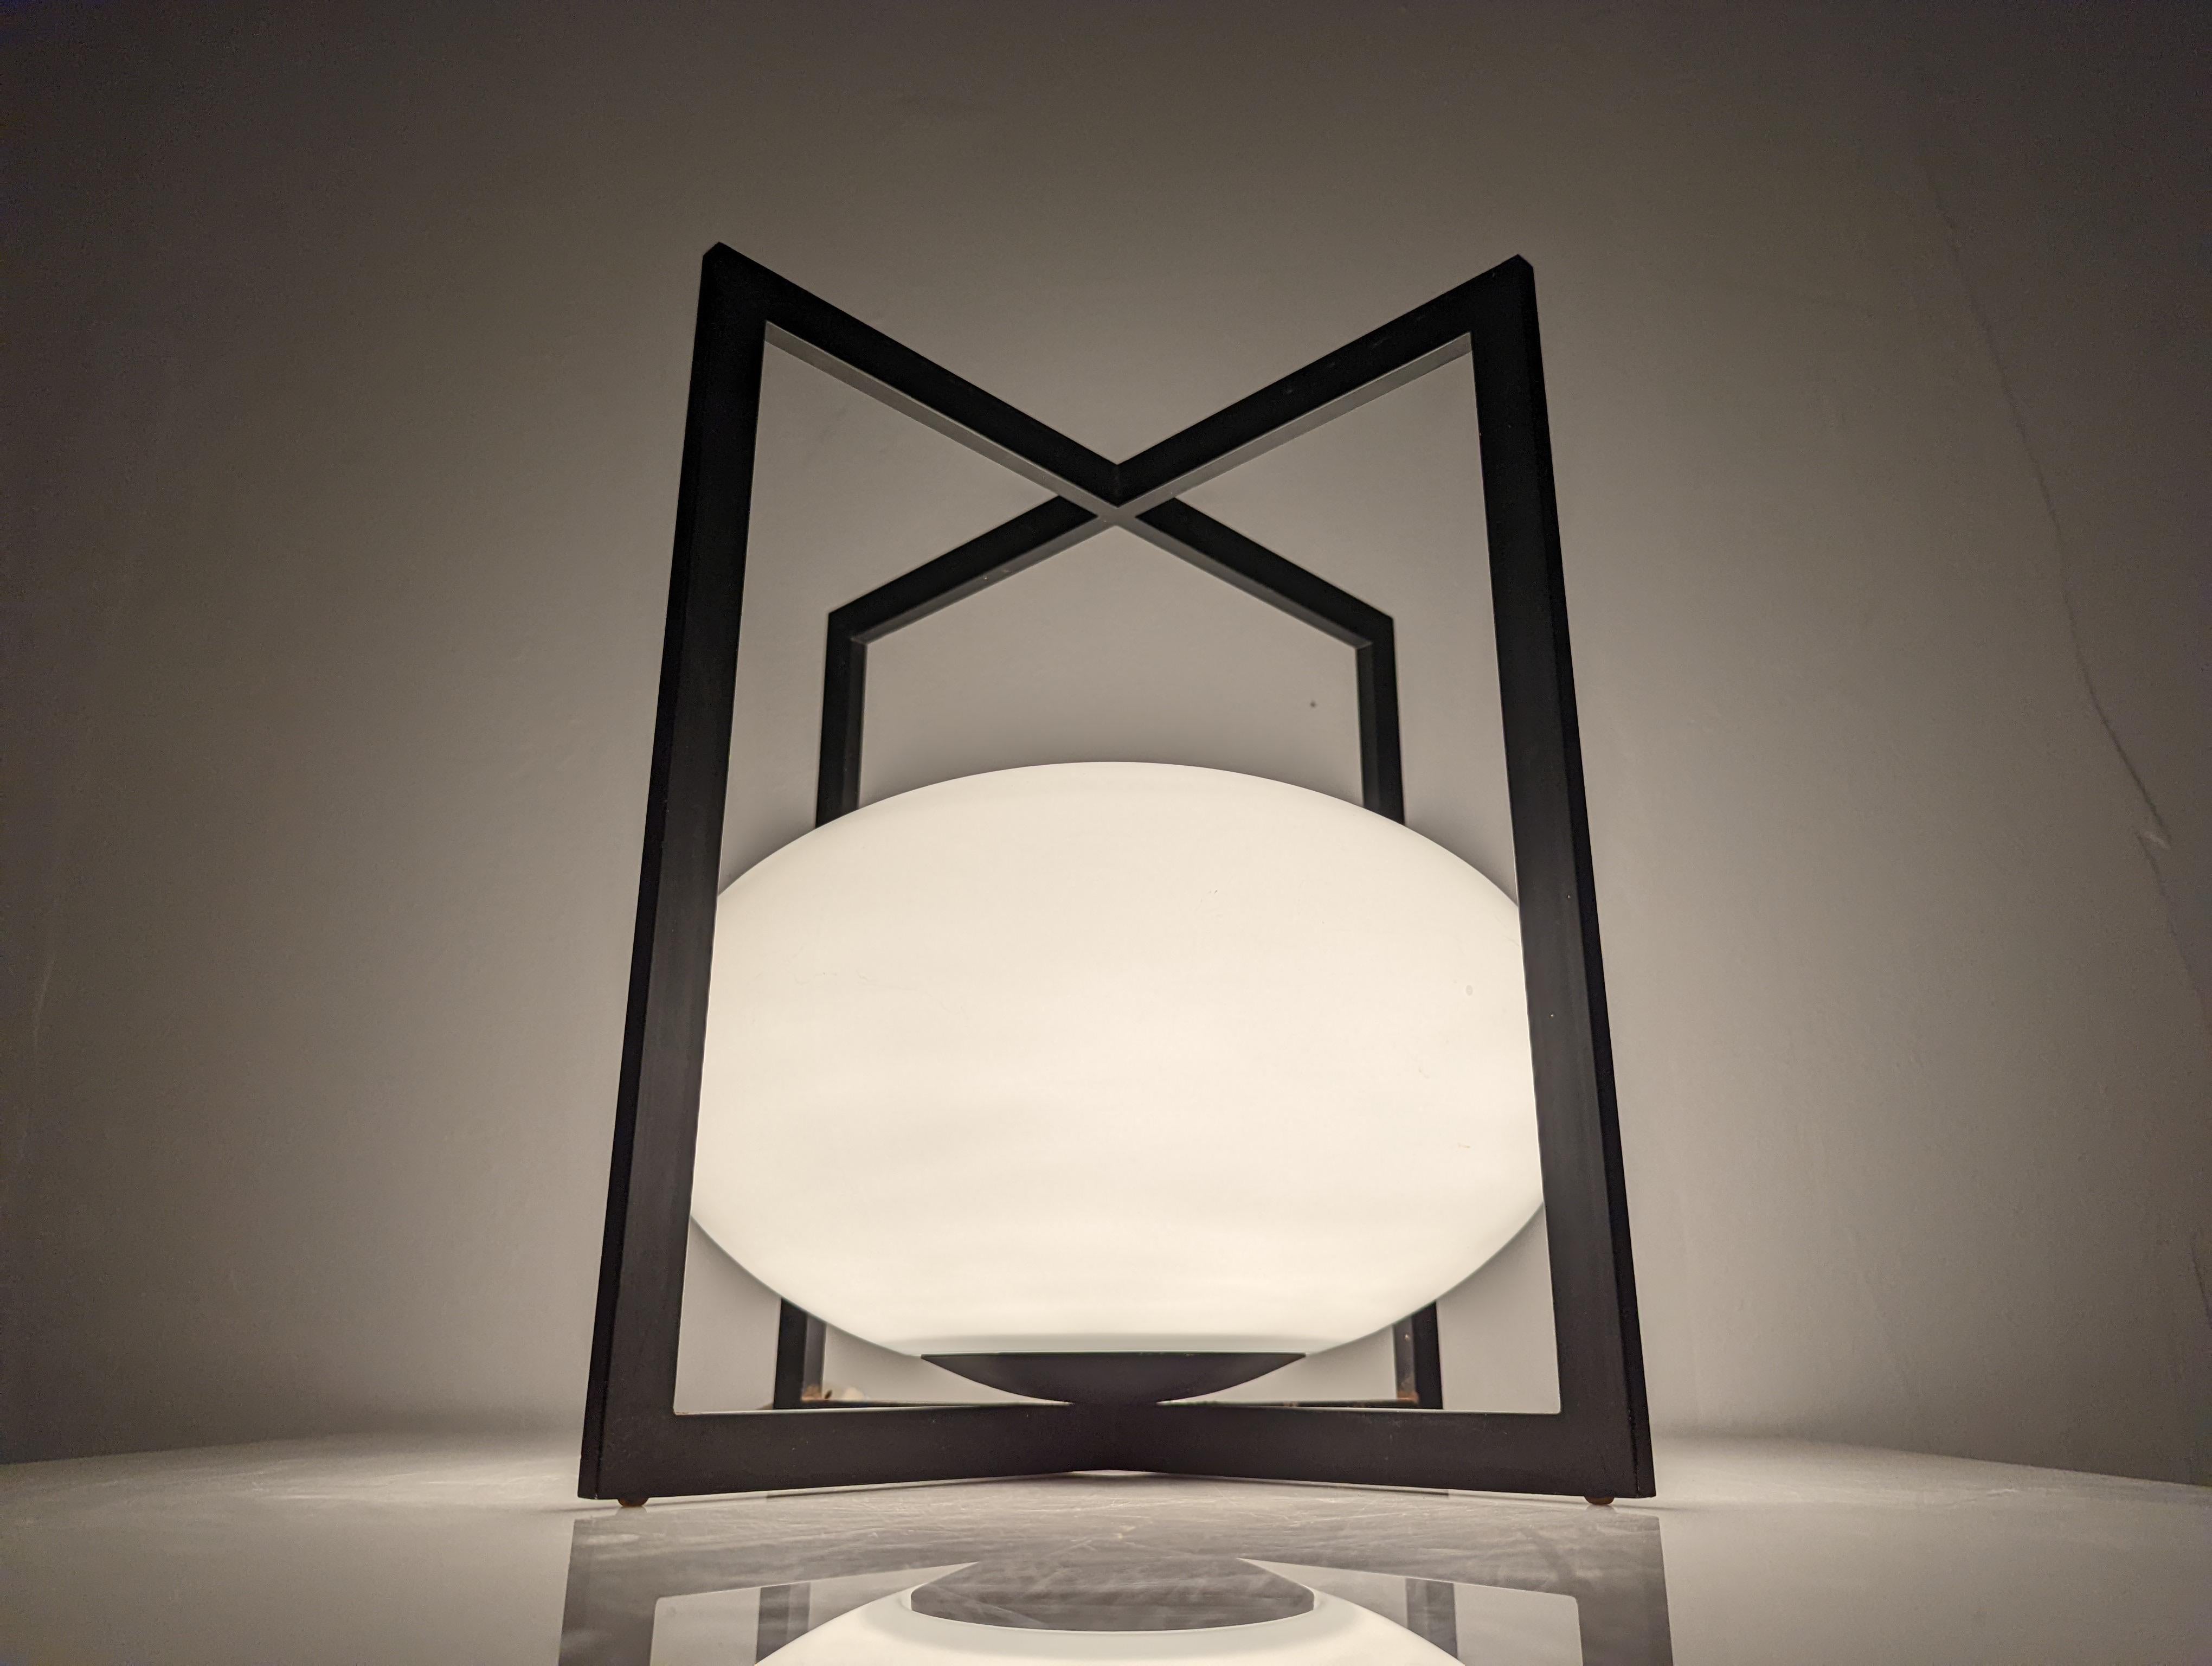 Wonderful vintage lamp from the 70s with a spectacular design in black metal and oval glass. With straight and clean lines, it undoubtedly overflows with the style and talent of a great designer of the time yet to be discovered.